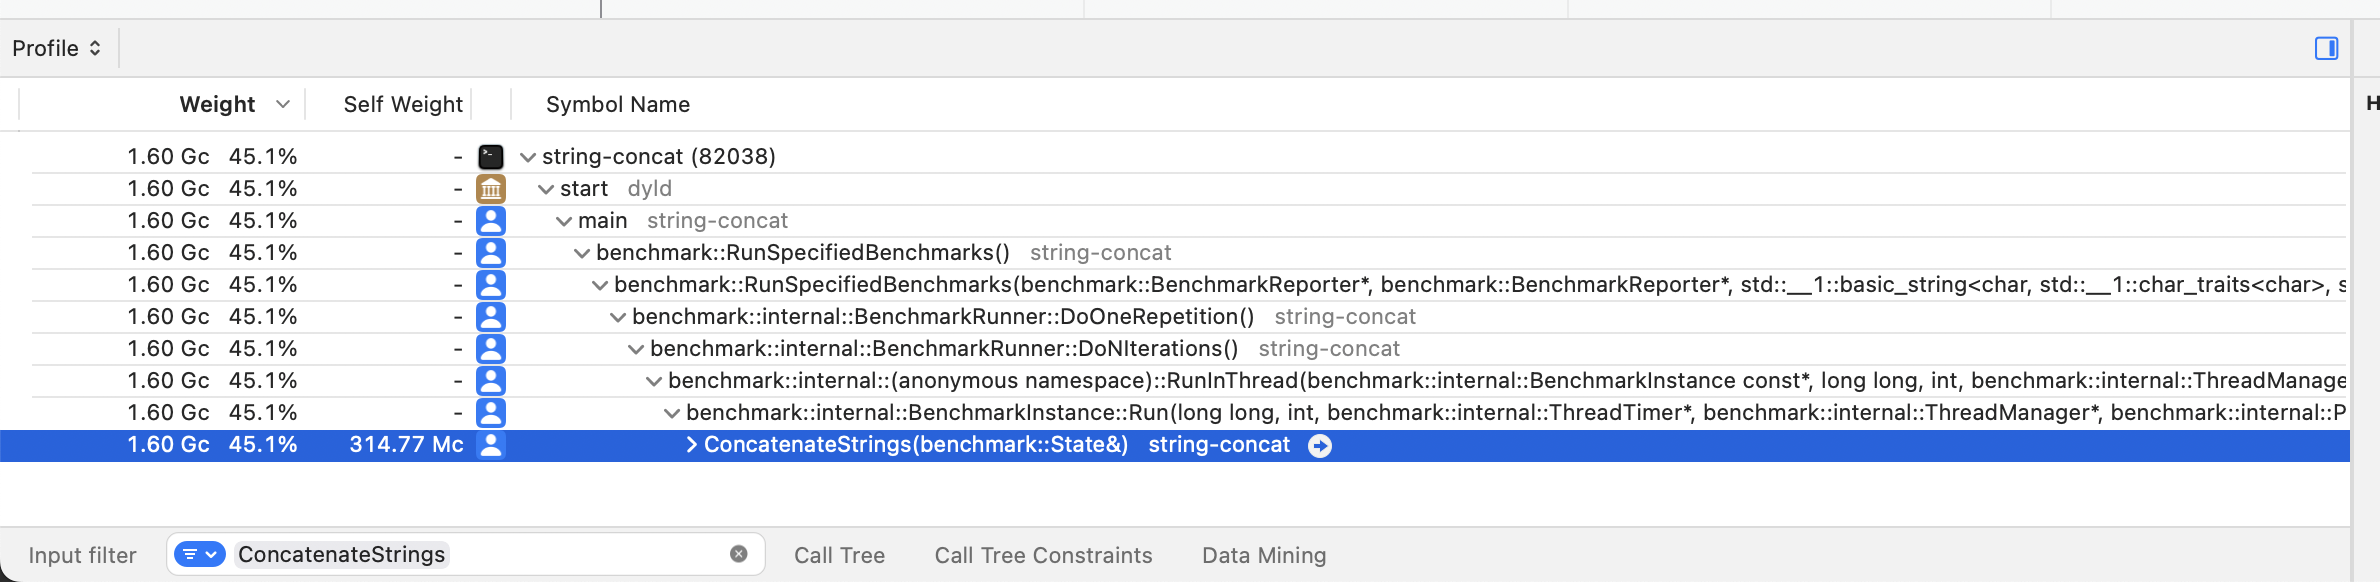 Filtering the call tree for the ConcatenateStrings function